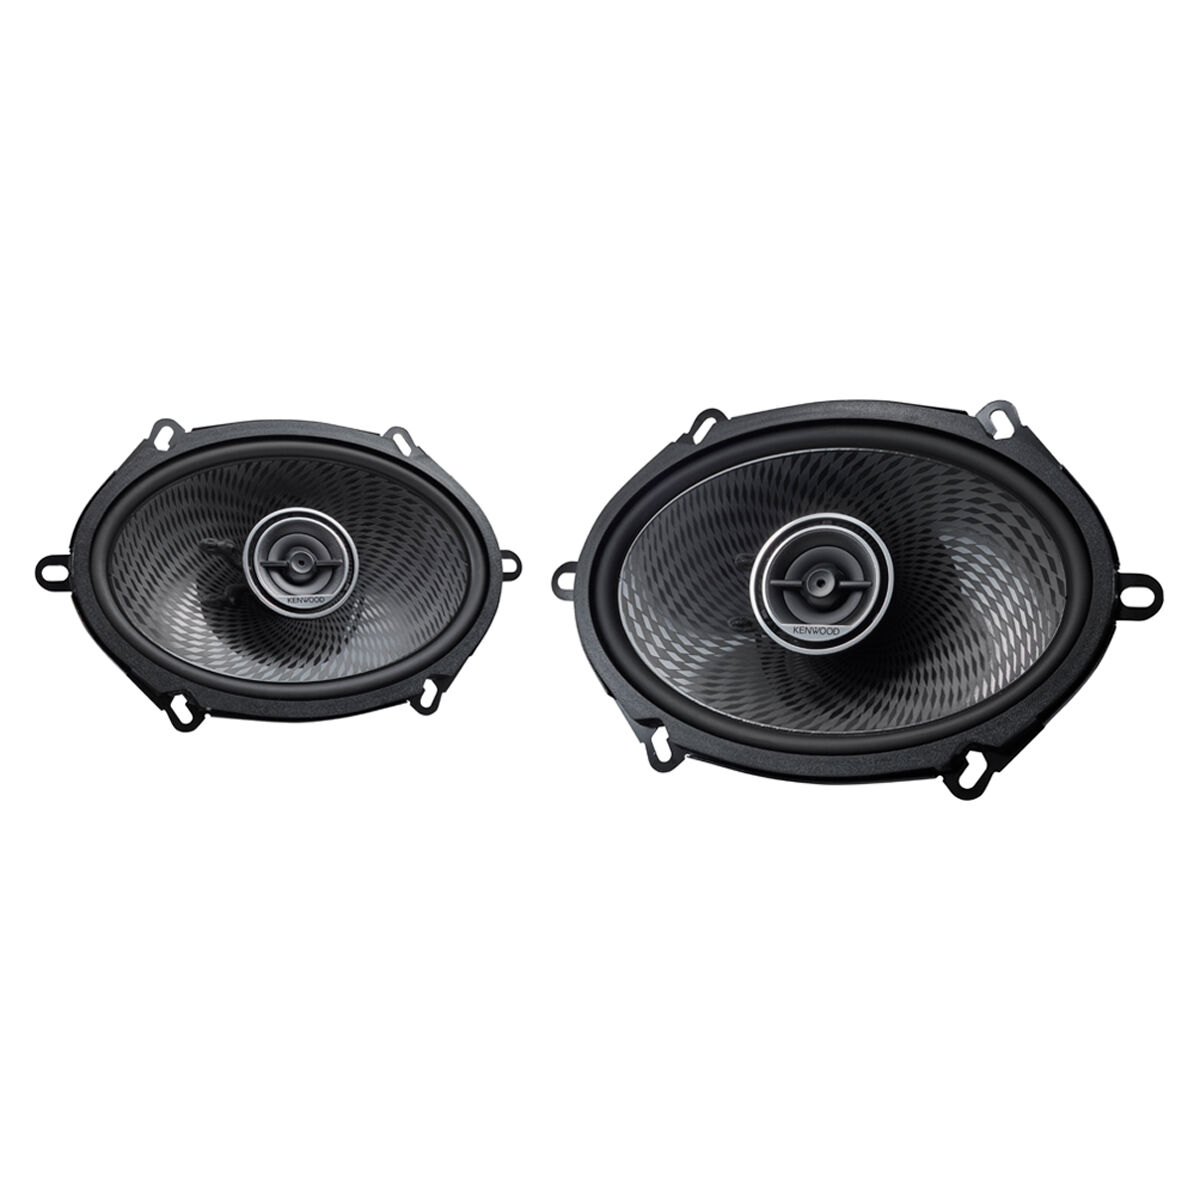 KENWOOD KFC-C5795PS 5x7 Speakers with Wiring Harness fits Ford 2 Pair 75watt RMS 